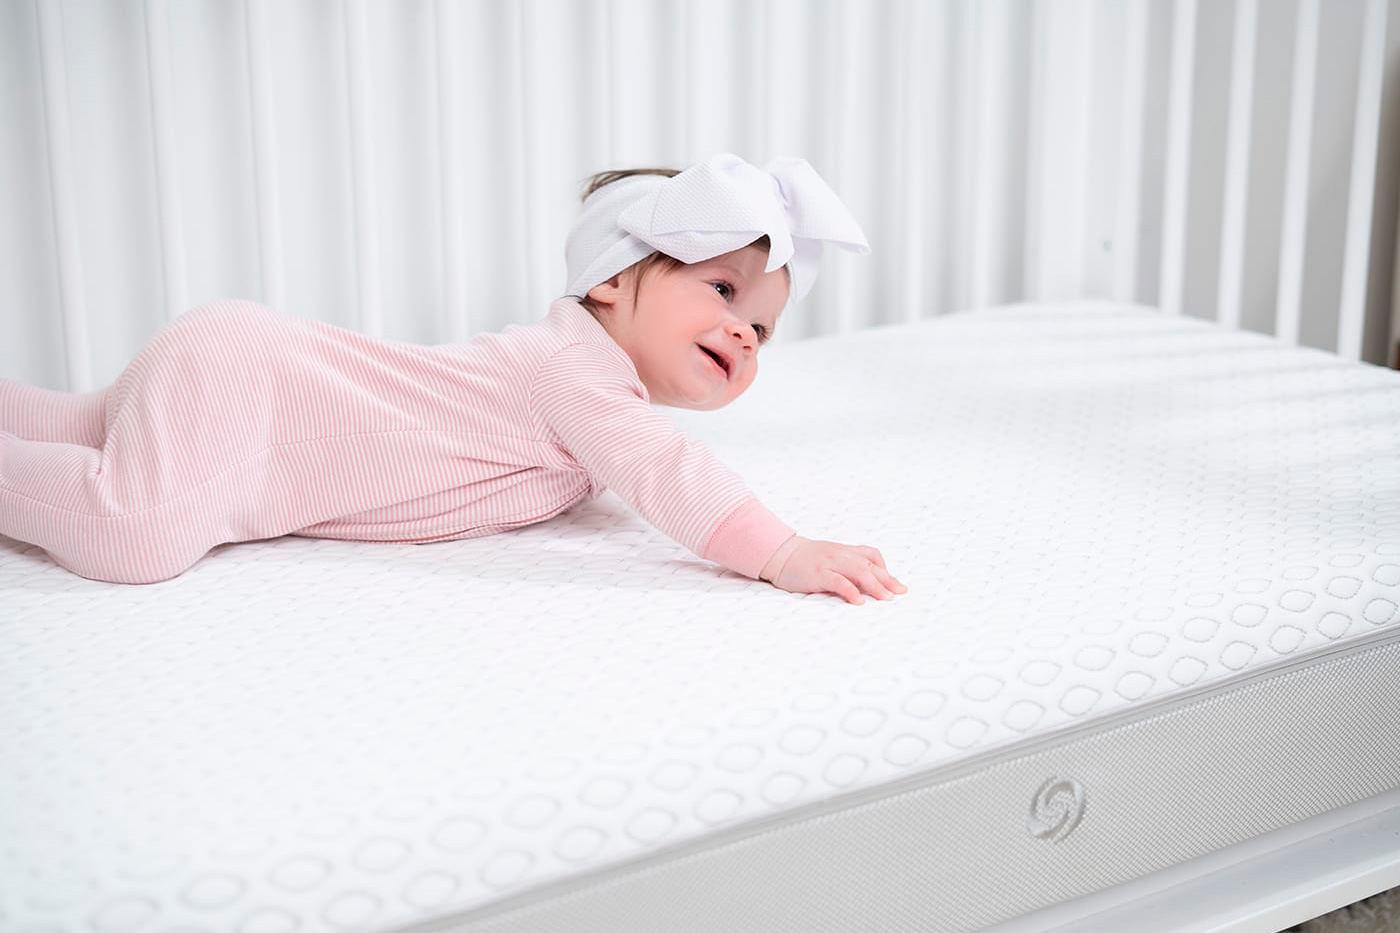 Gentle to the touch and comfortable to use mattress for children - Bedgear Air-X Performance Crib And Toddler Mattress